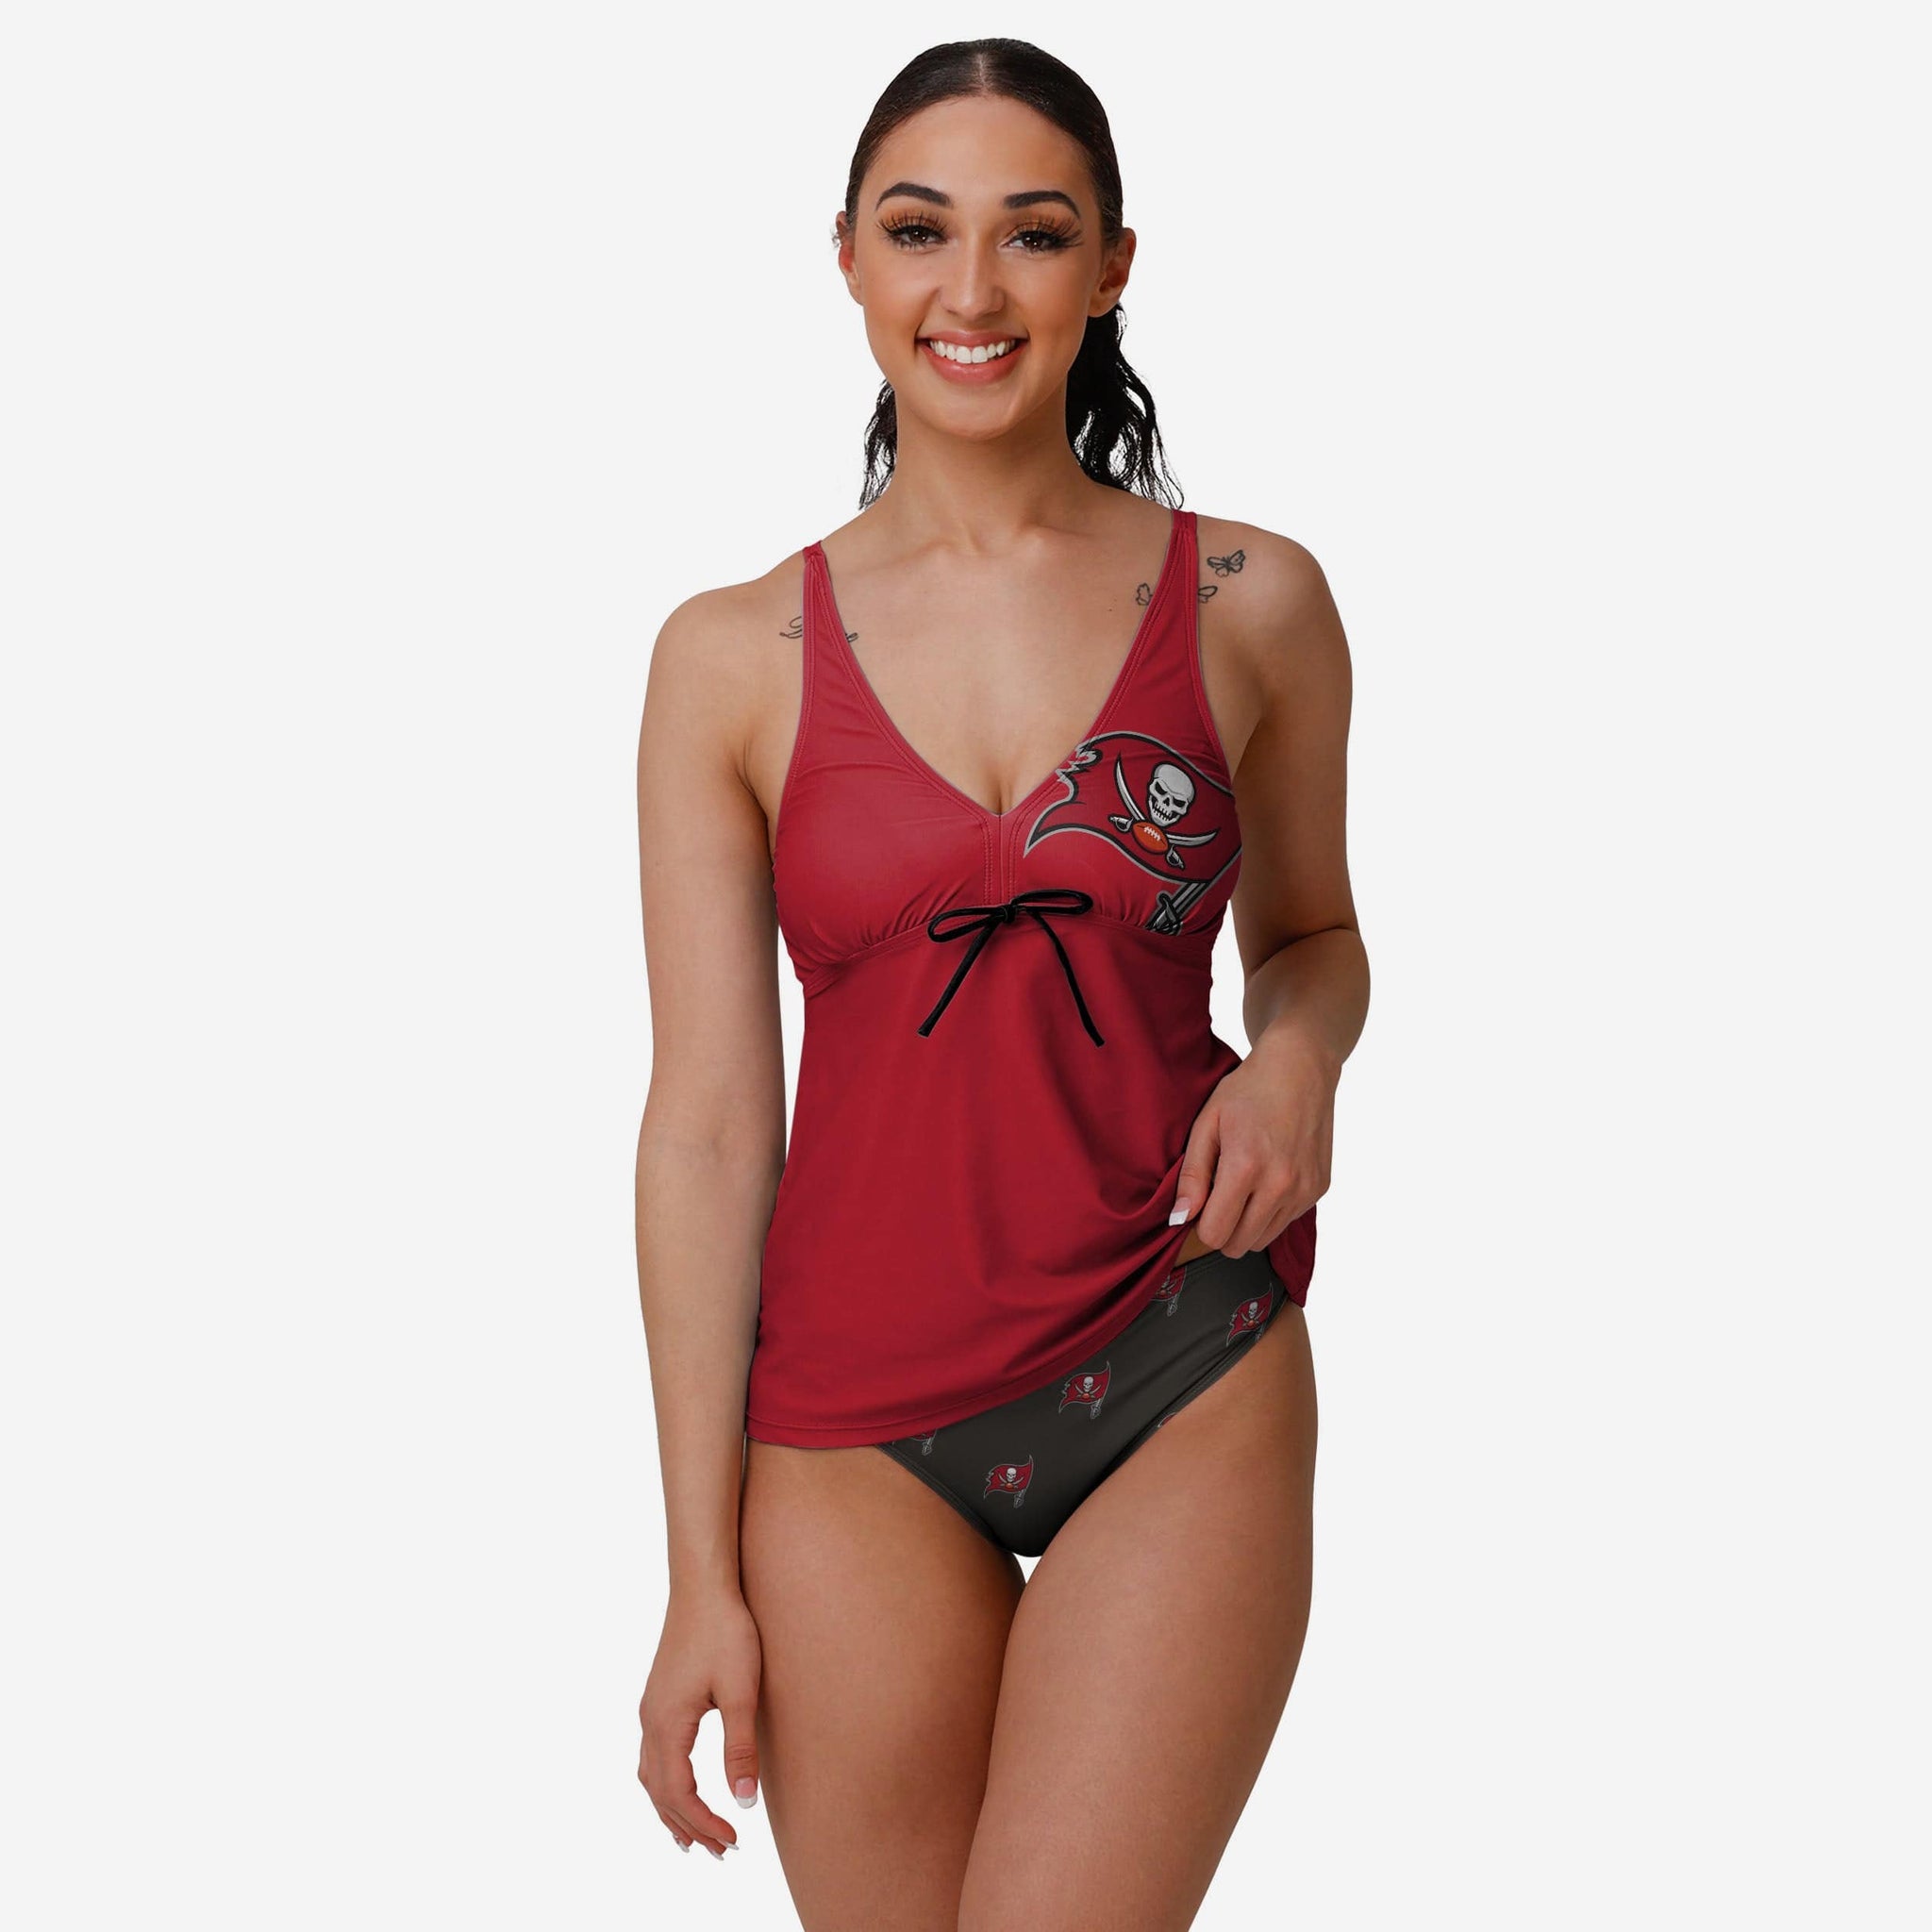 Official Tampa Bay Buccaneers Swim Collection, Buccaneers Bathing Suits,  Sandals, Beach Towels